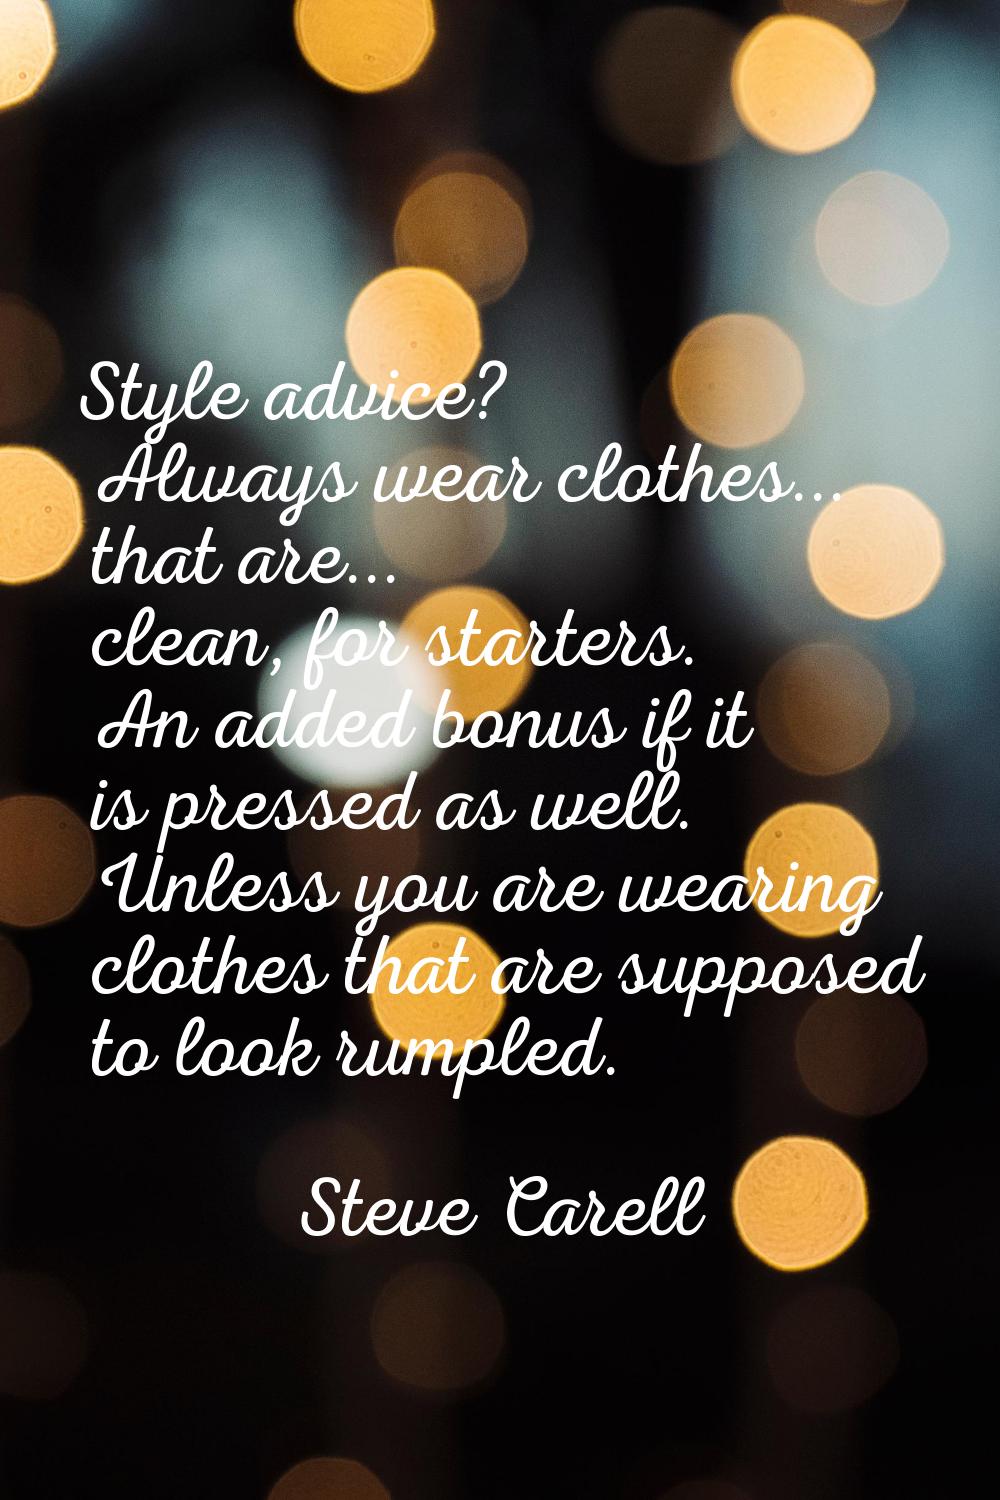 Style advice? Always wear clothes... that are... clean, for starters. An added bonus if it is press